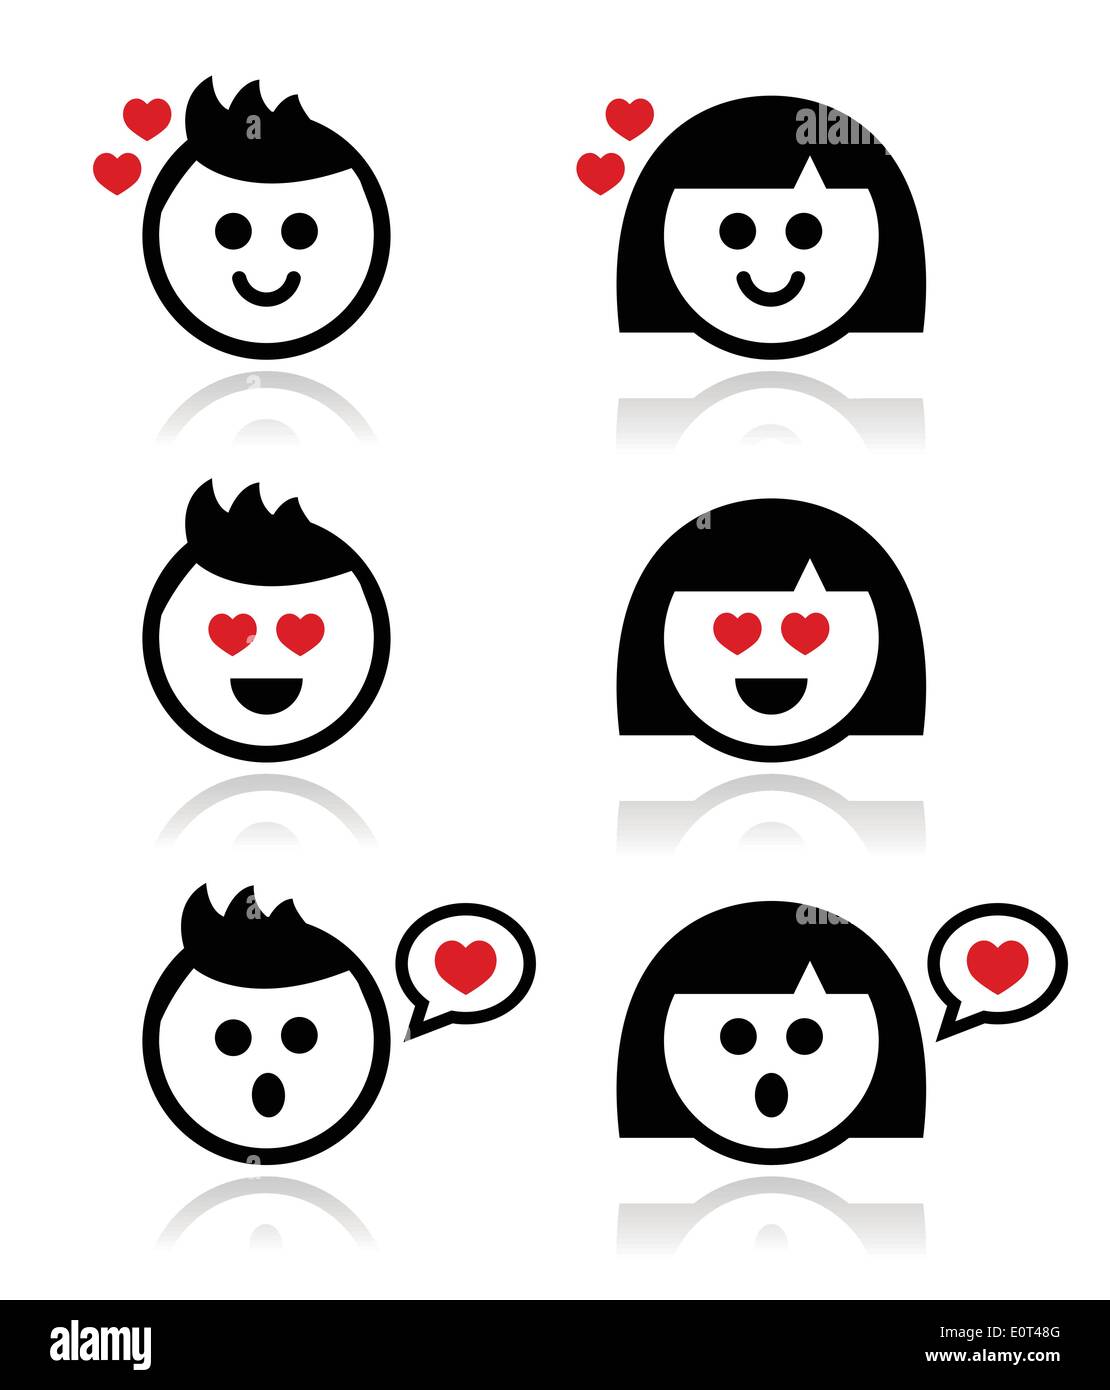 Man and woman in love icons set Stock Vector